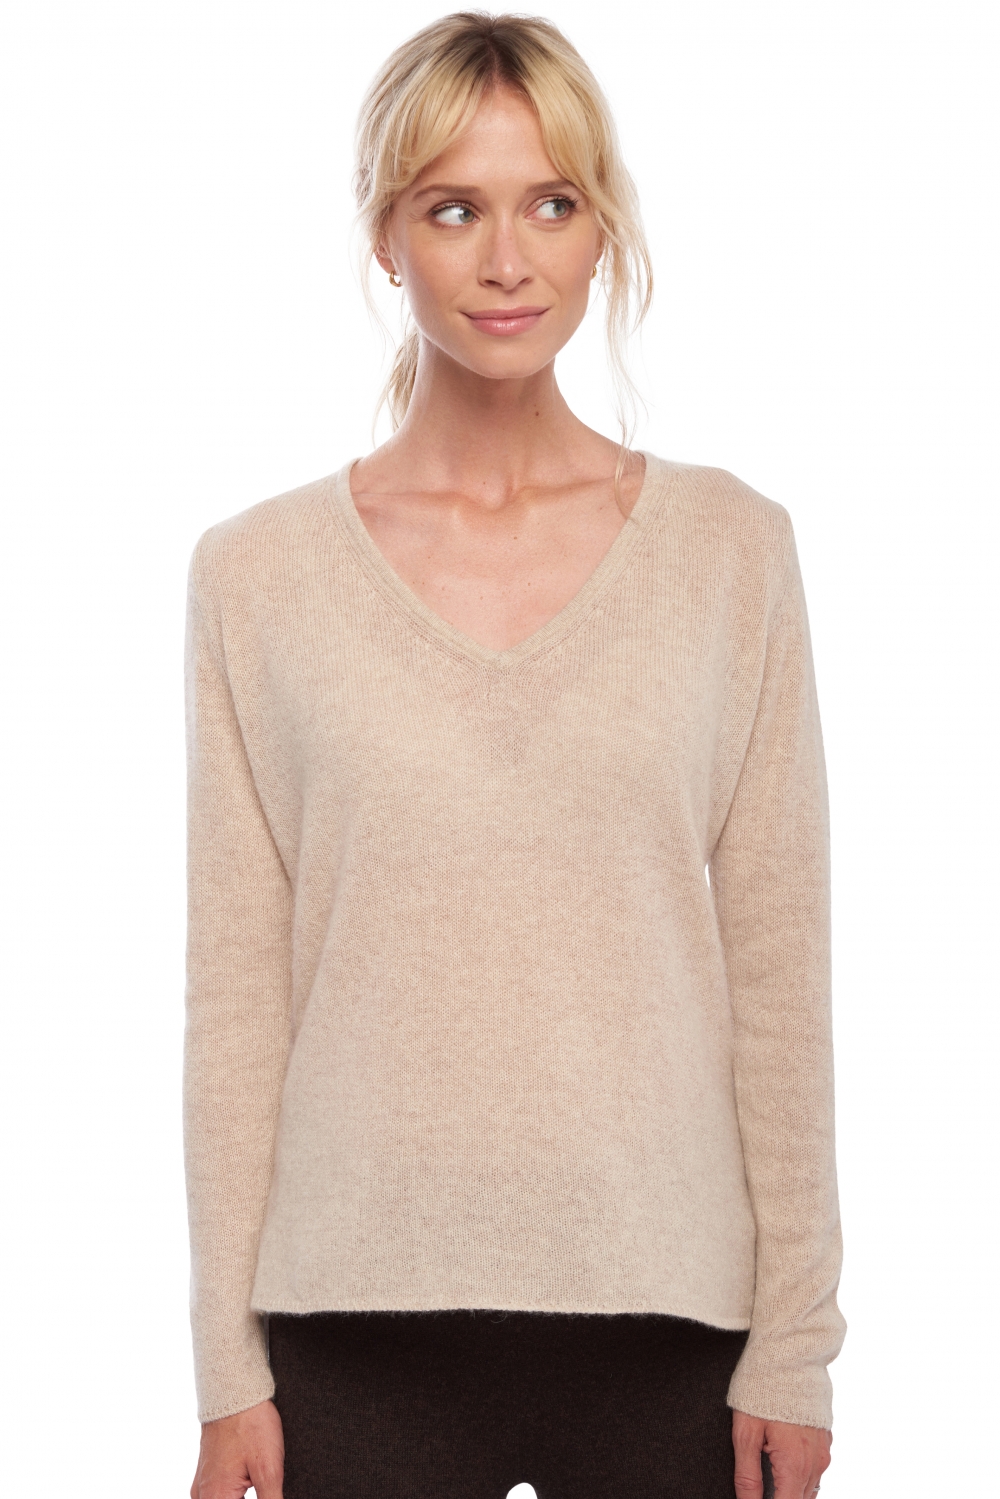 Cashmere ladies basic sweaters at low prices flavie natural beige xl